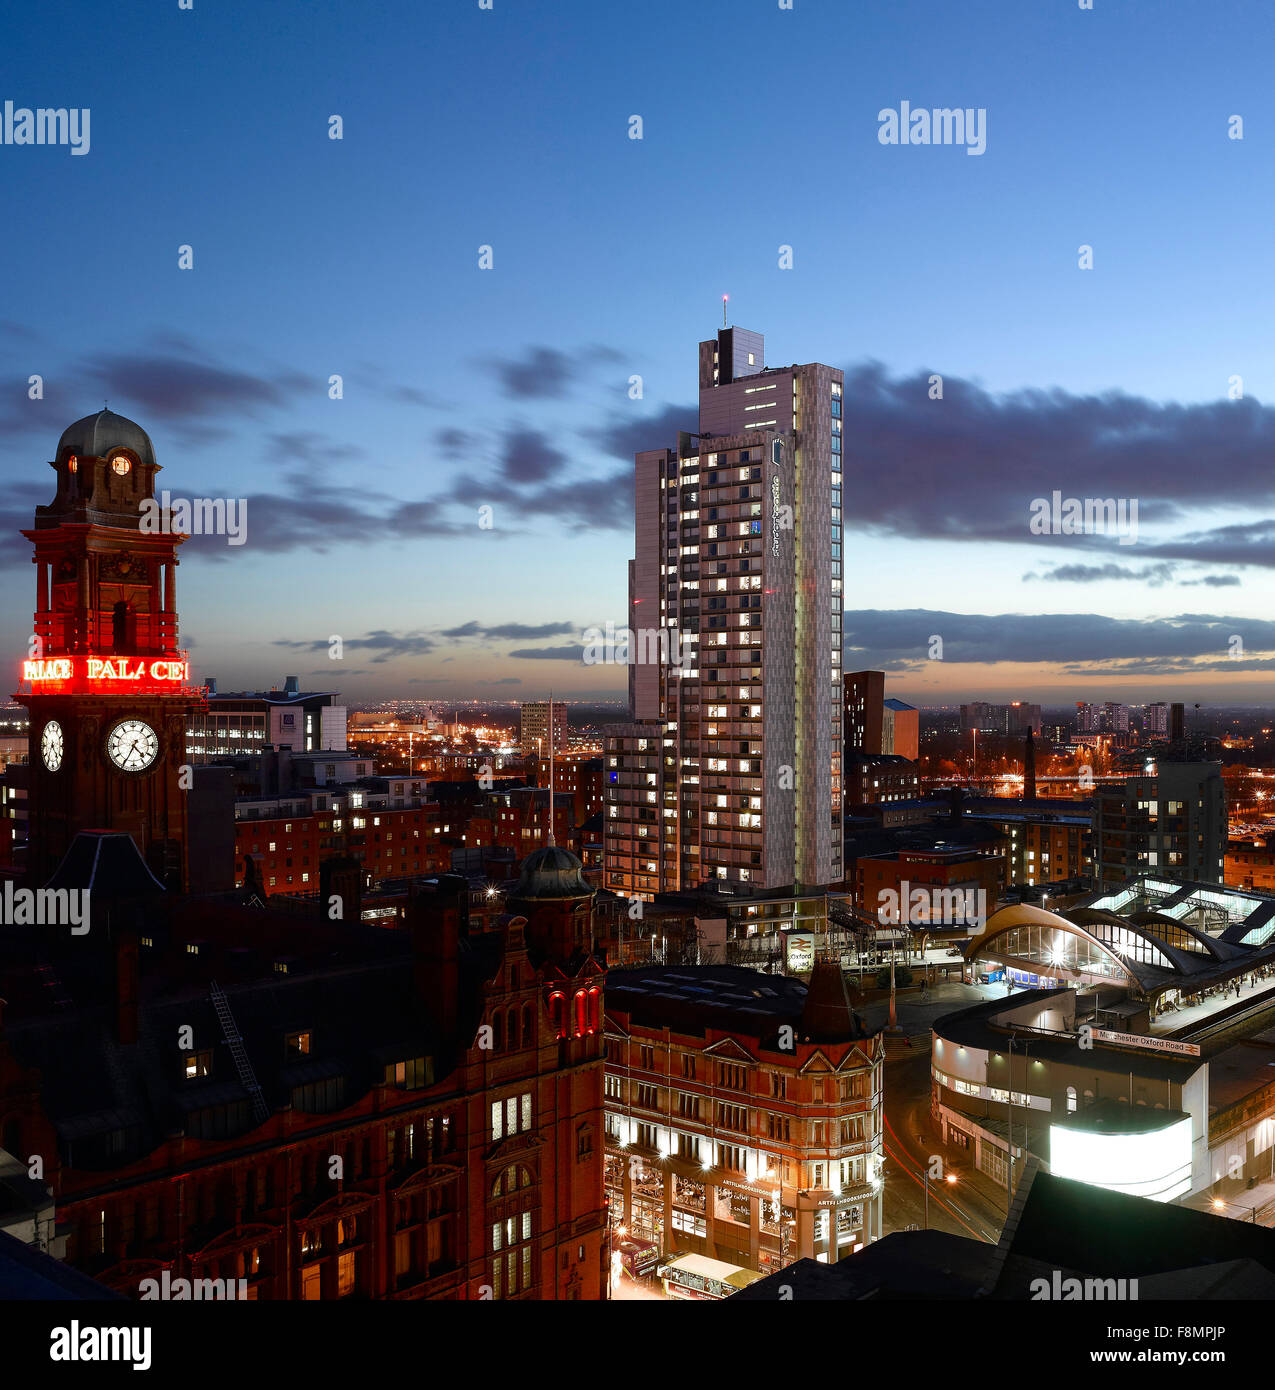 Student Castle, Manchester. Student accommodation. View of the building at night time. City skyline. Stock Photo